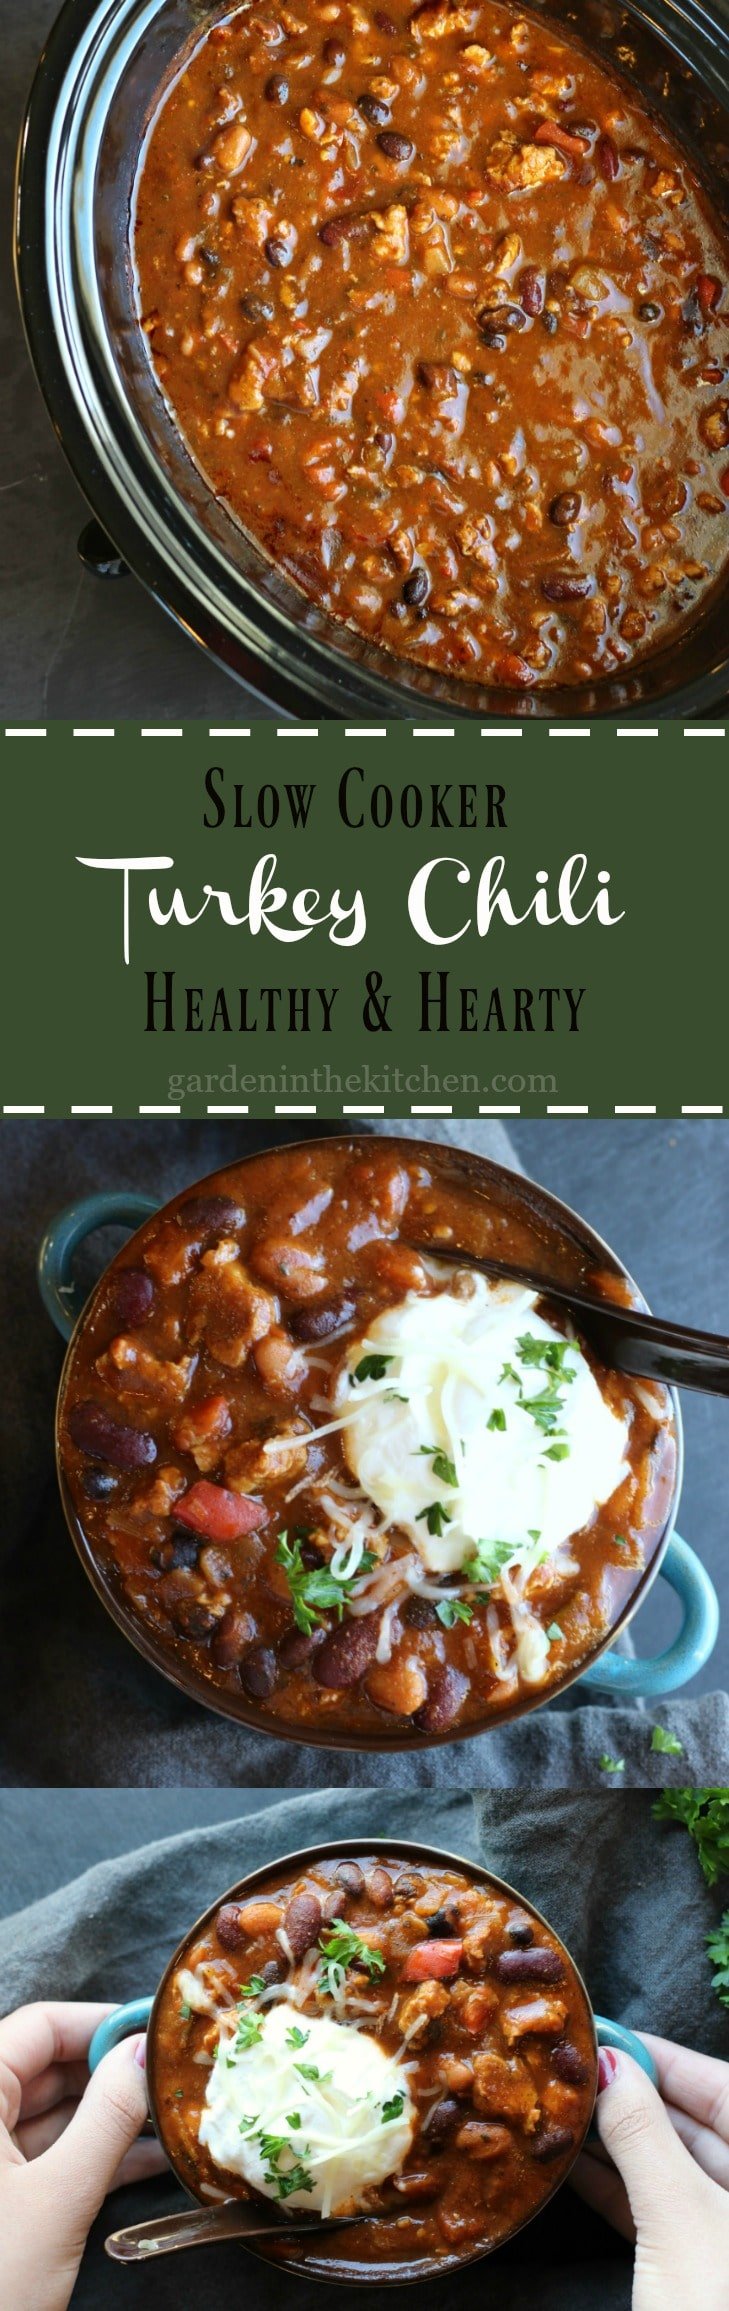 Slow Cooker Turkey Chili (UPDATED WITH INSTANT POT INSTRUCTIONS!)